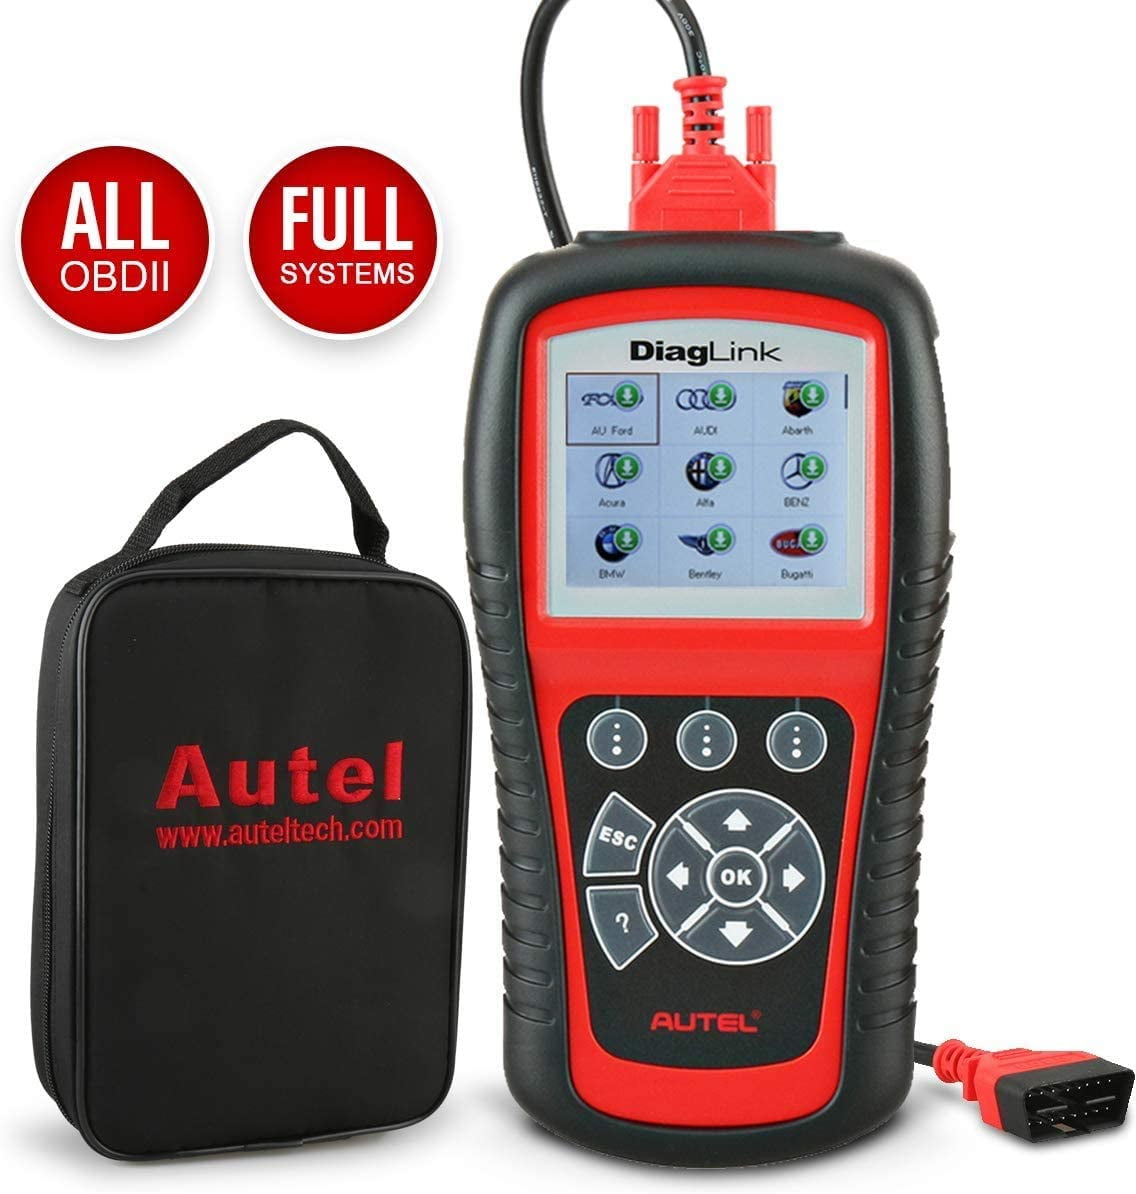 Autel Professional Scan Tool MaxiDiag Elite MD802 Oil Service EPB Engine, Transmission, ABS, Airbag OBD2 Car Code Reader for All Systems Car Diagnostic Scanner for All Electronic Modules 